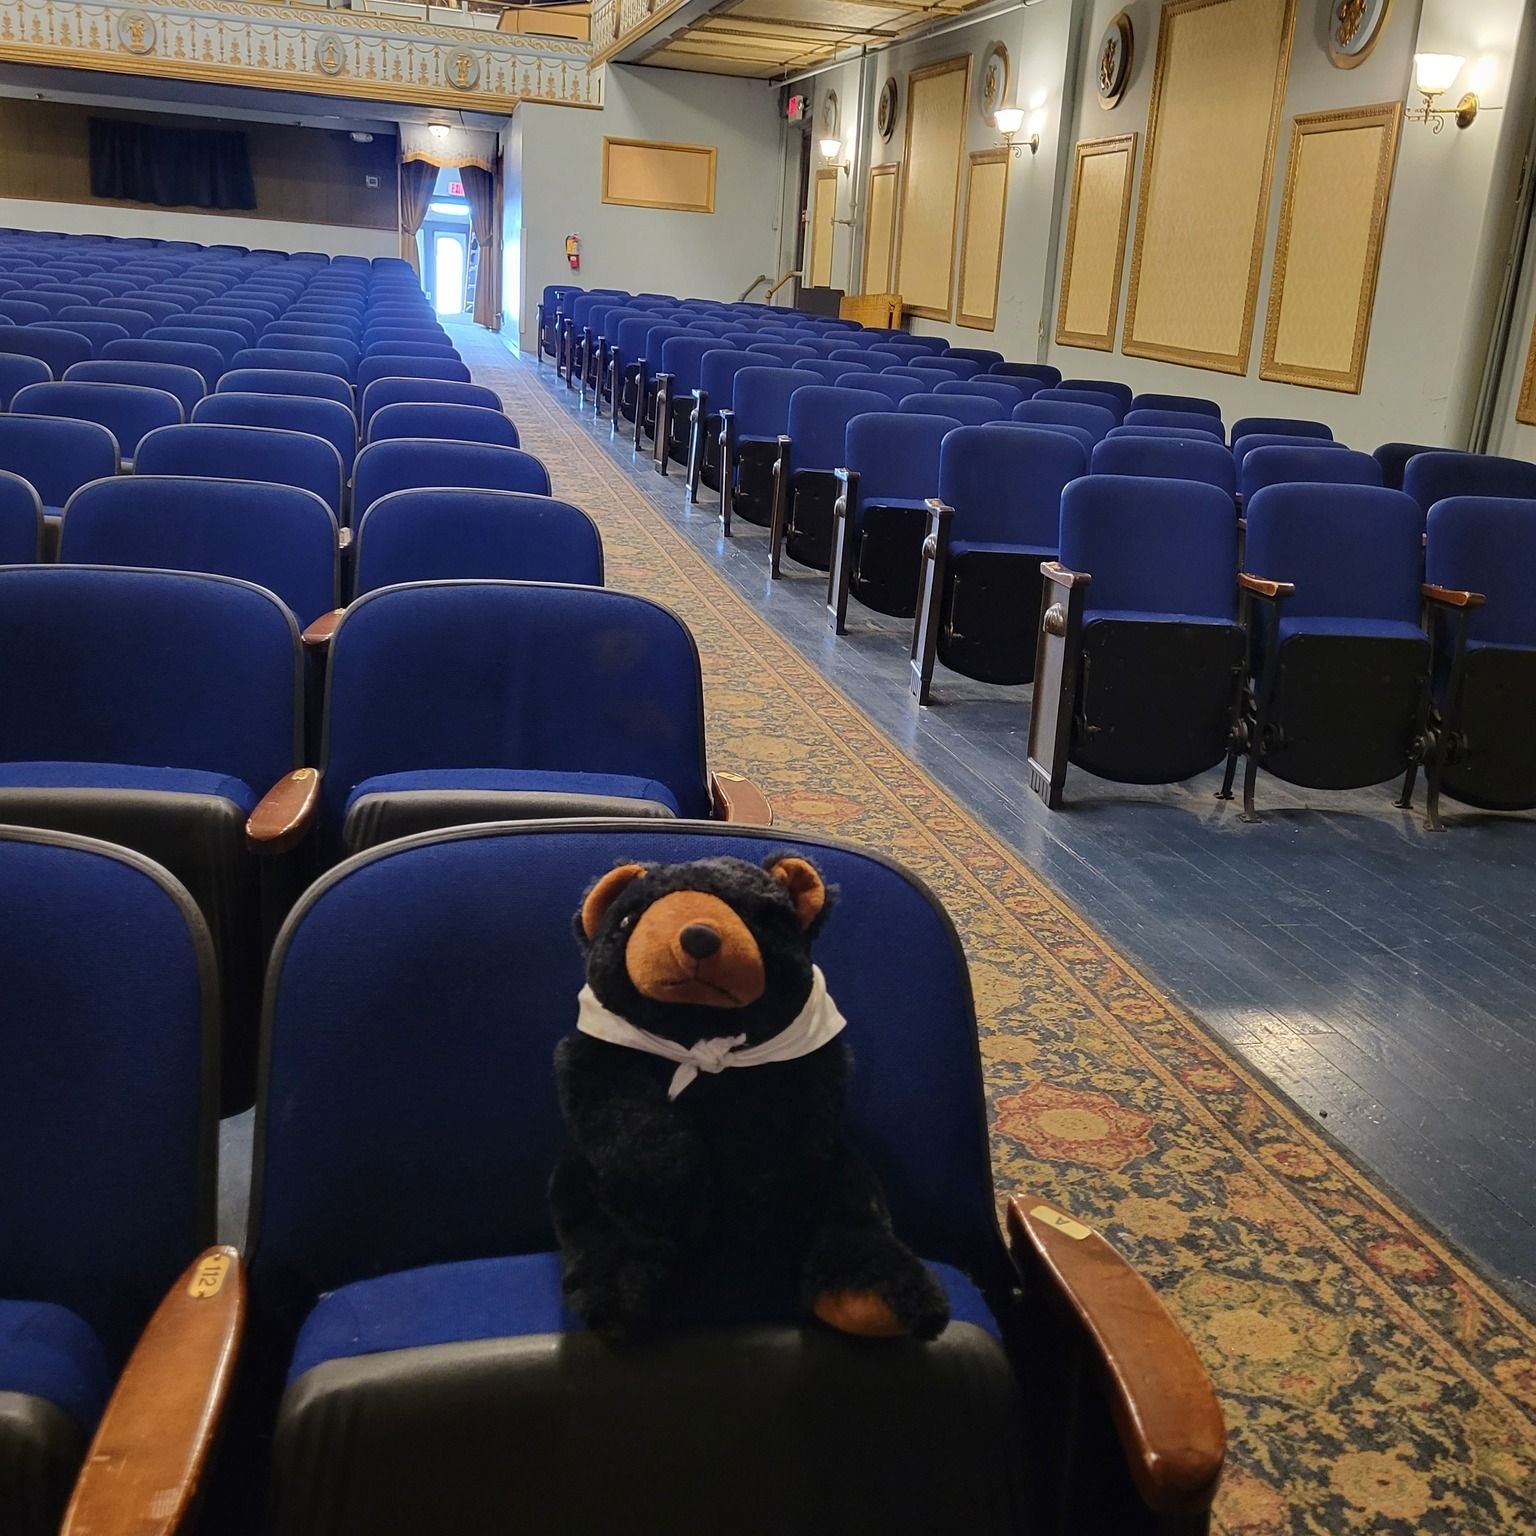 Marti loves to visit the Apollo theater and is looking forward to seeing Lee Dean back at the Apollo with The Rat Pack this Friday, May 17th. 
#martionthemove  #visitmartinsburg #berkeleycountywv